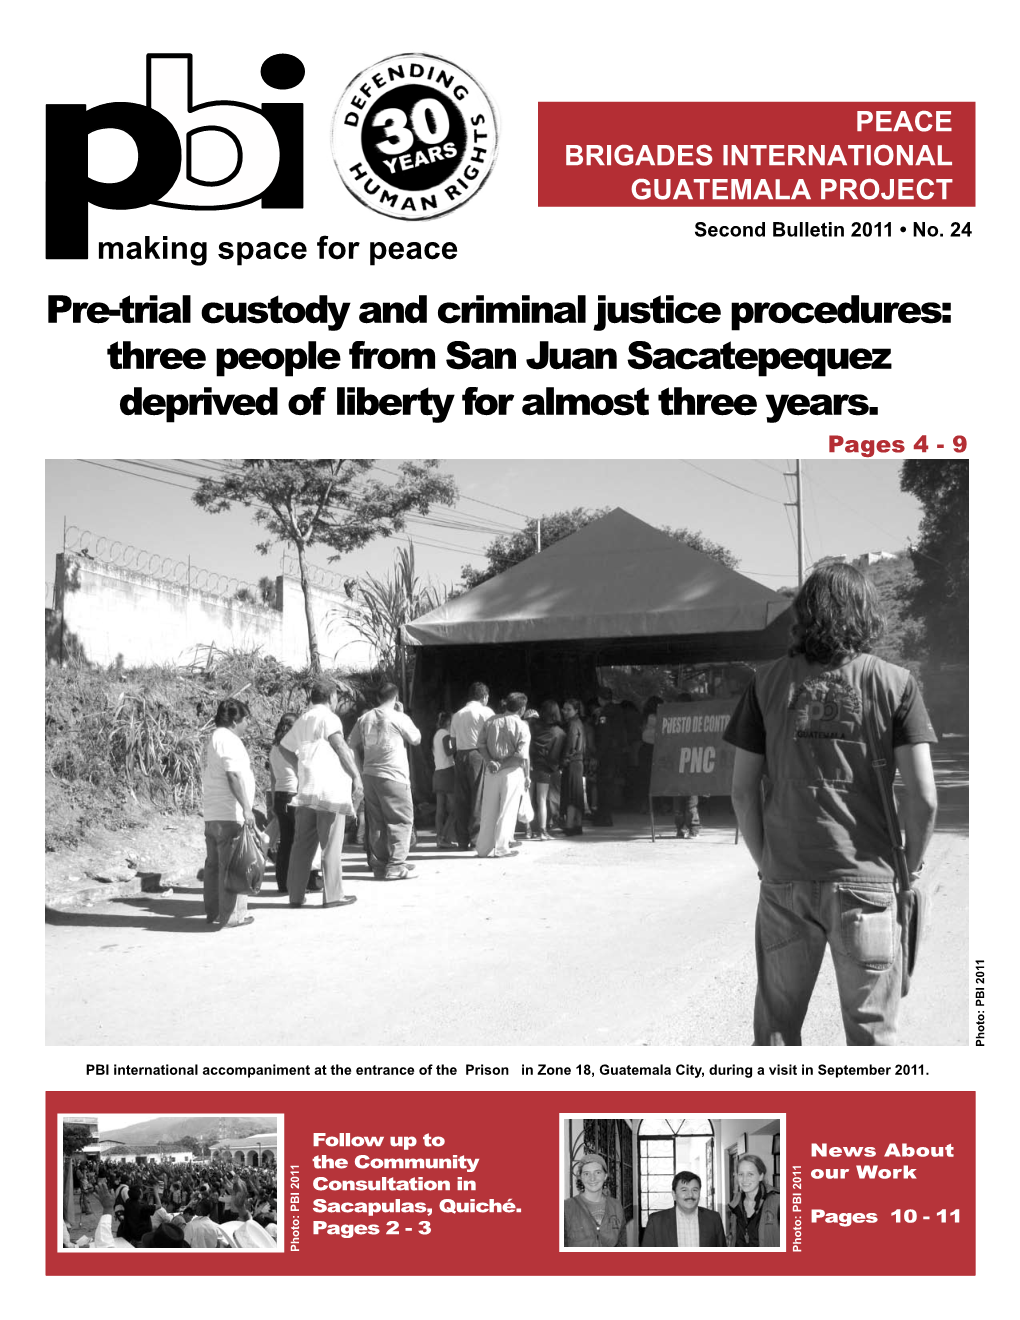 Pre-Trial Custody and Criminal Justice Procedures: Three People from San Juan Sacatepequez Deprived of Liberty for Almost Three Years